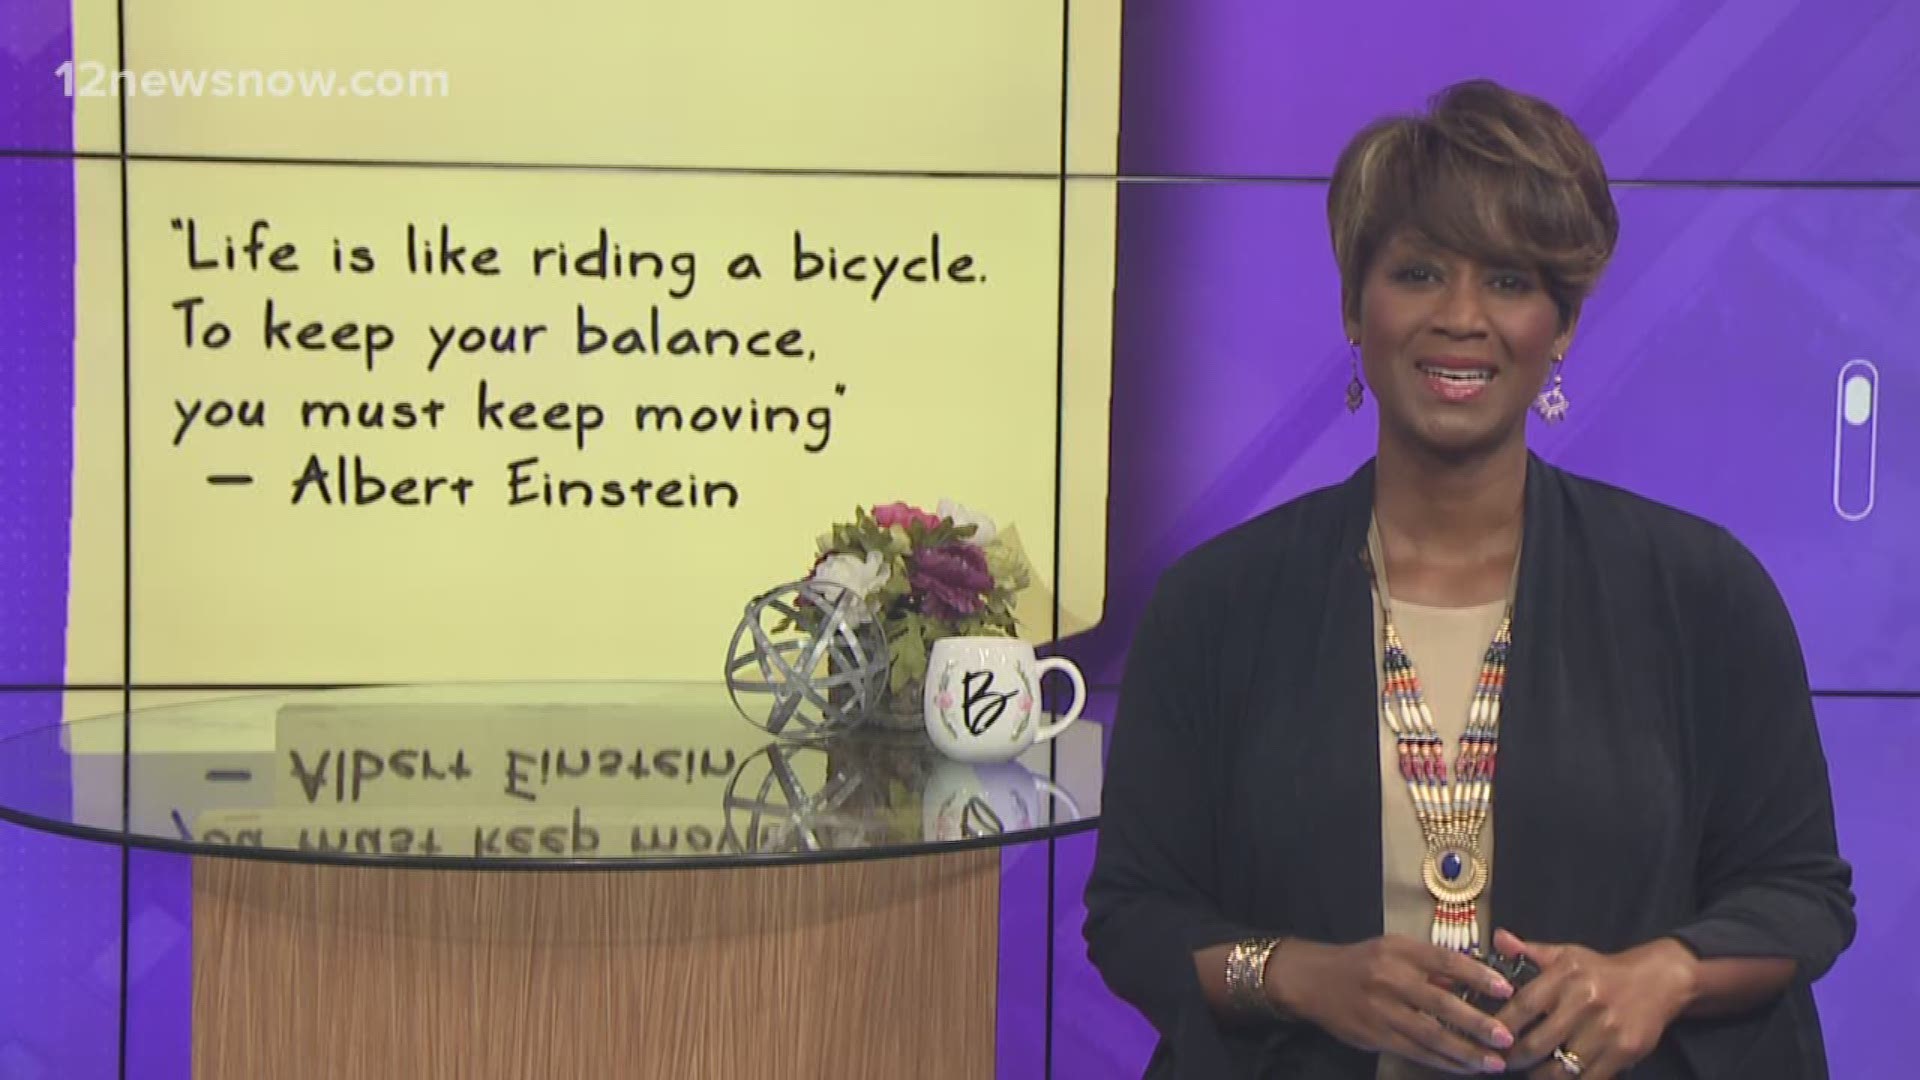 "LIFE IS LIKE RIDING A BICYCLE. TO KEEP YOUR BALANCE, YOU MUST KEEP MOVING." --ALBERT EINSTEIN